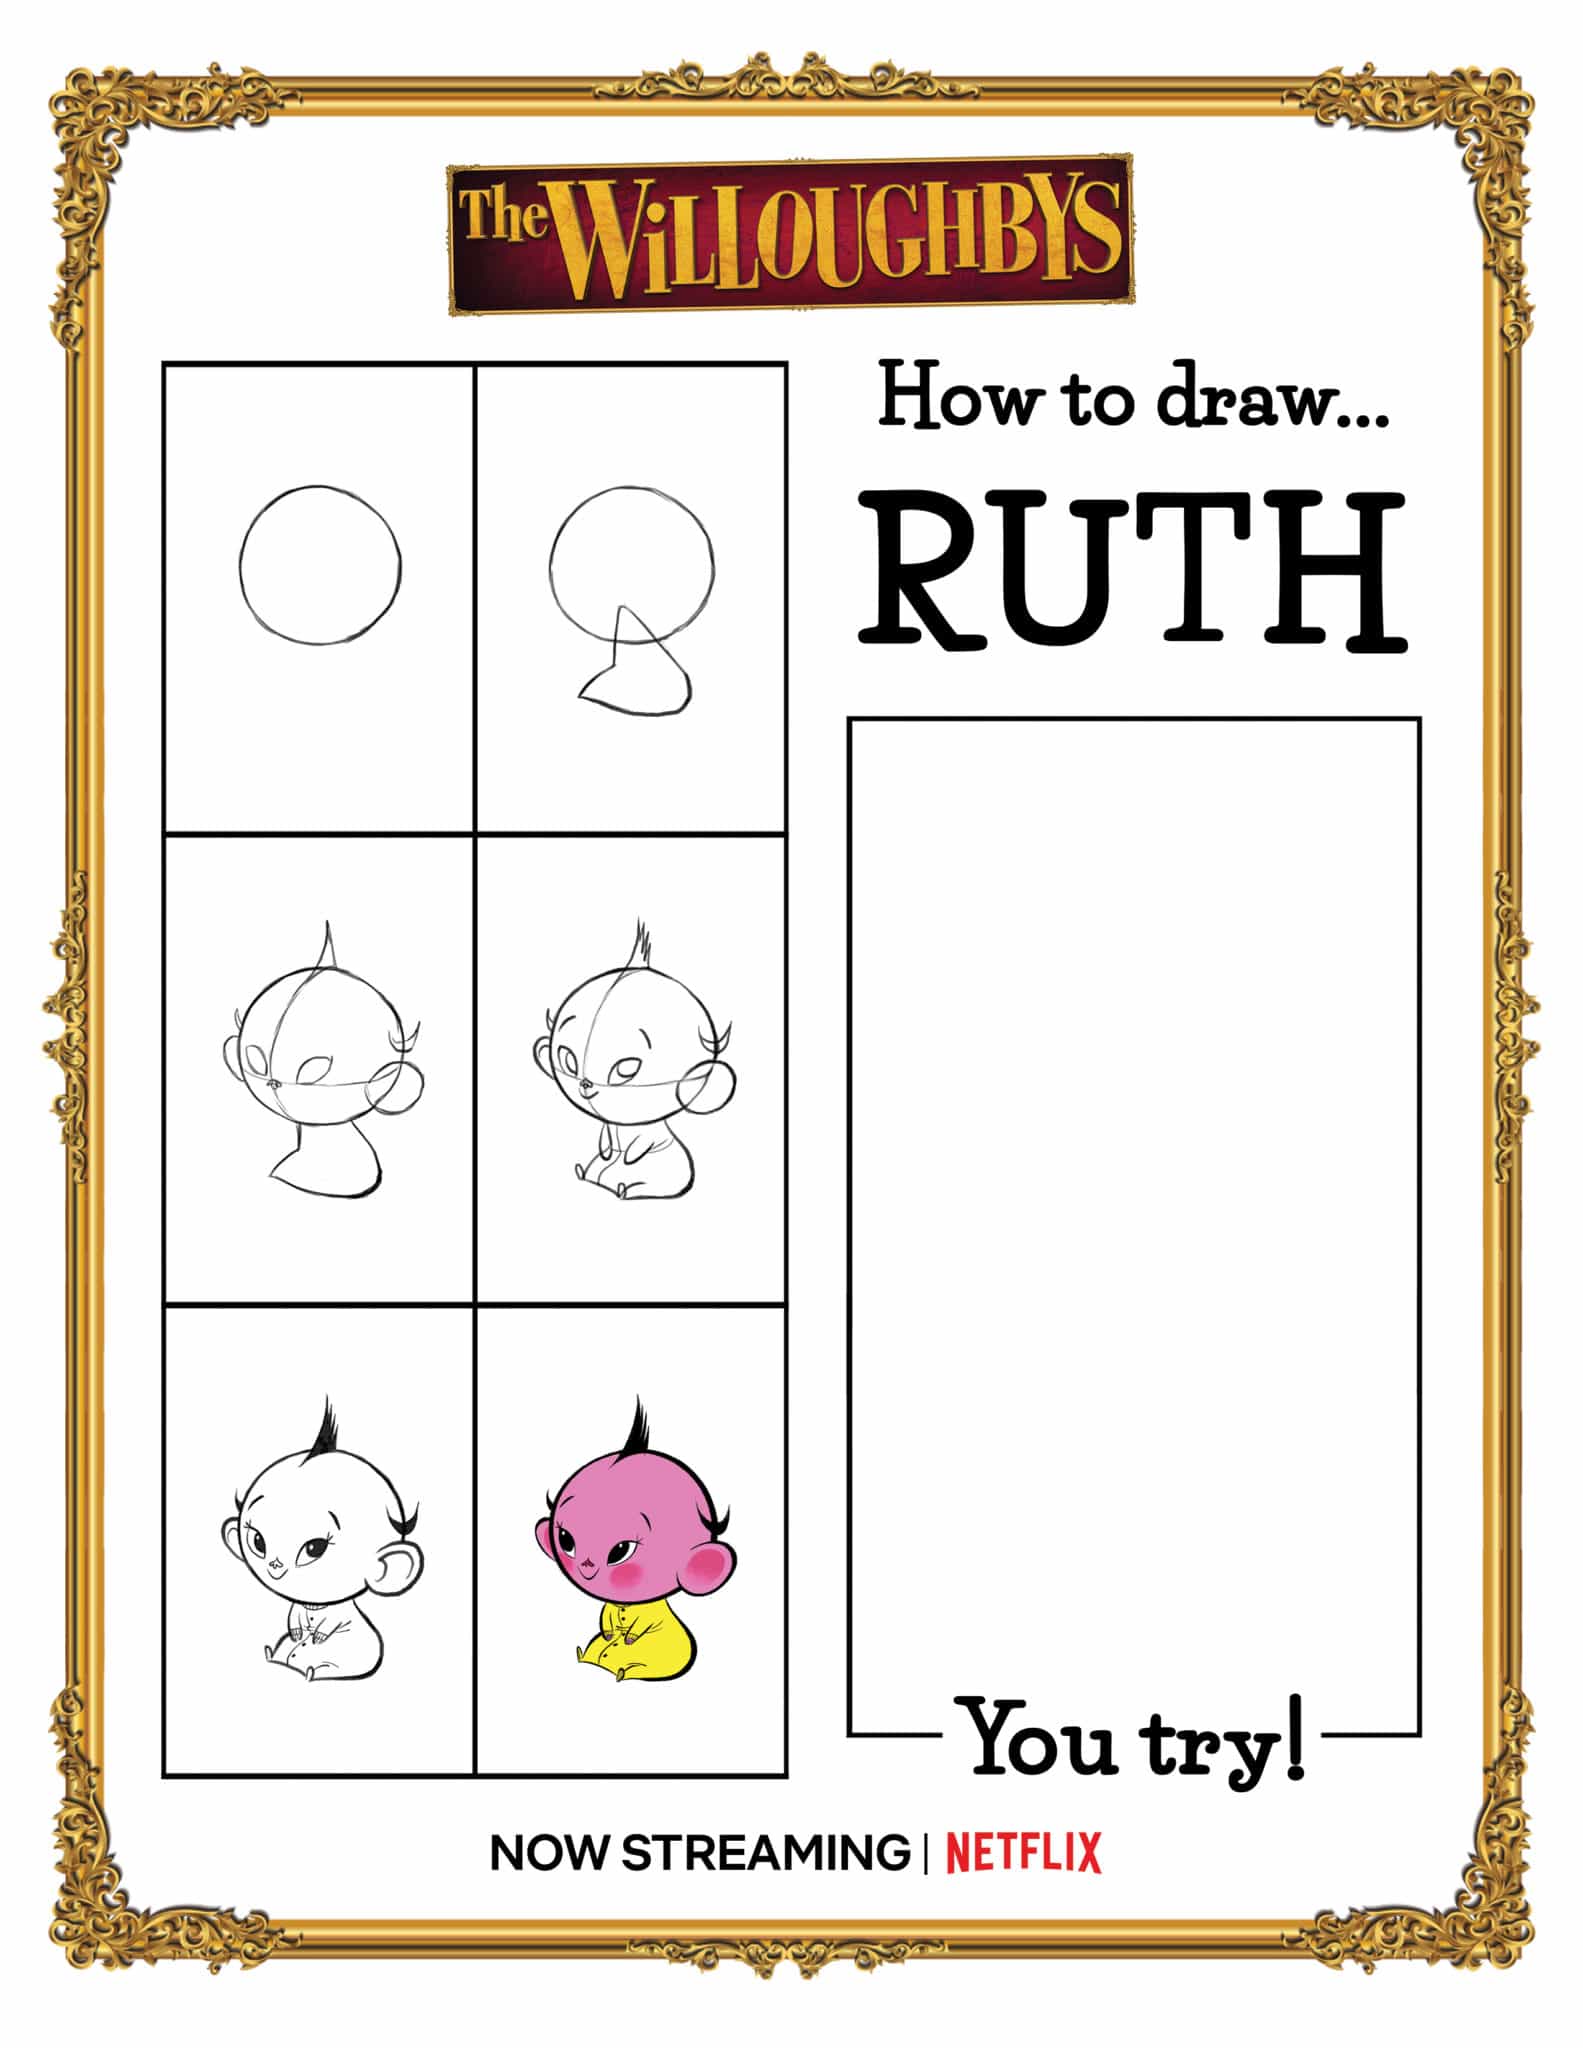 The Willoughbys How To Draw Ruth Activity Sheet